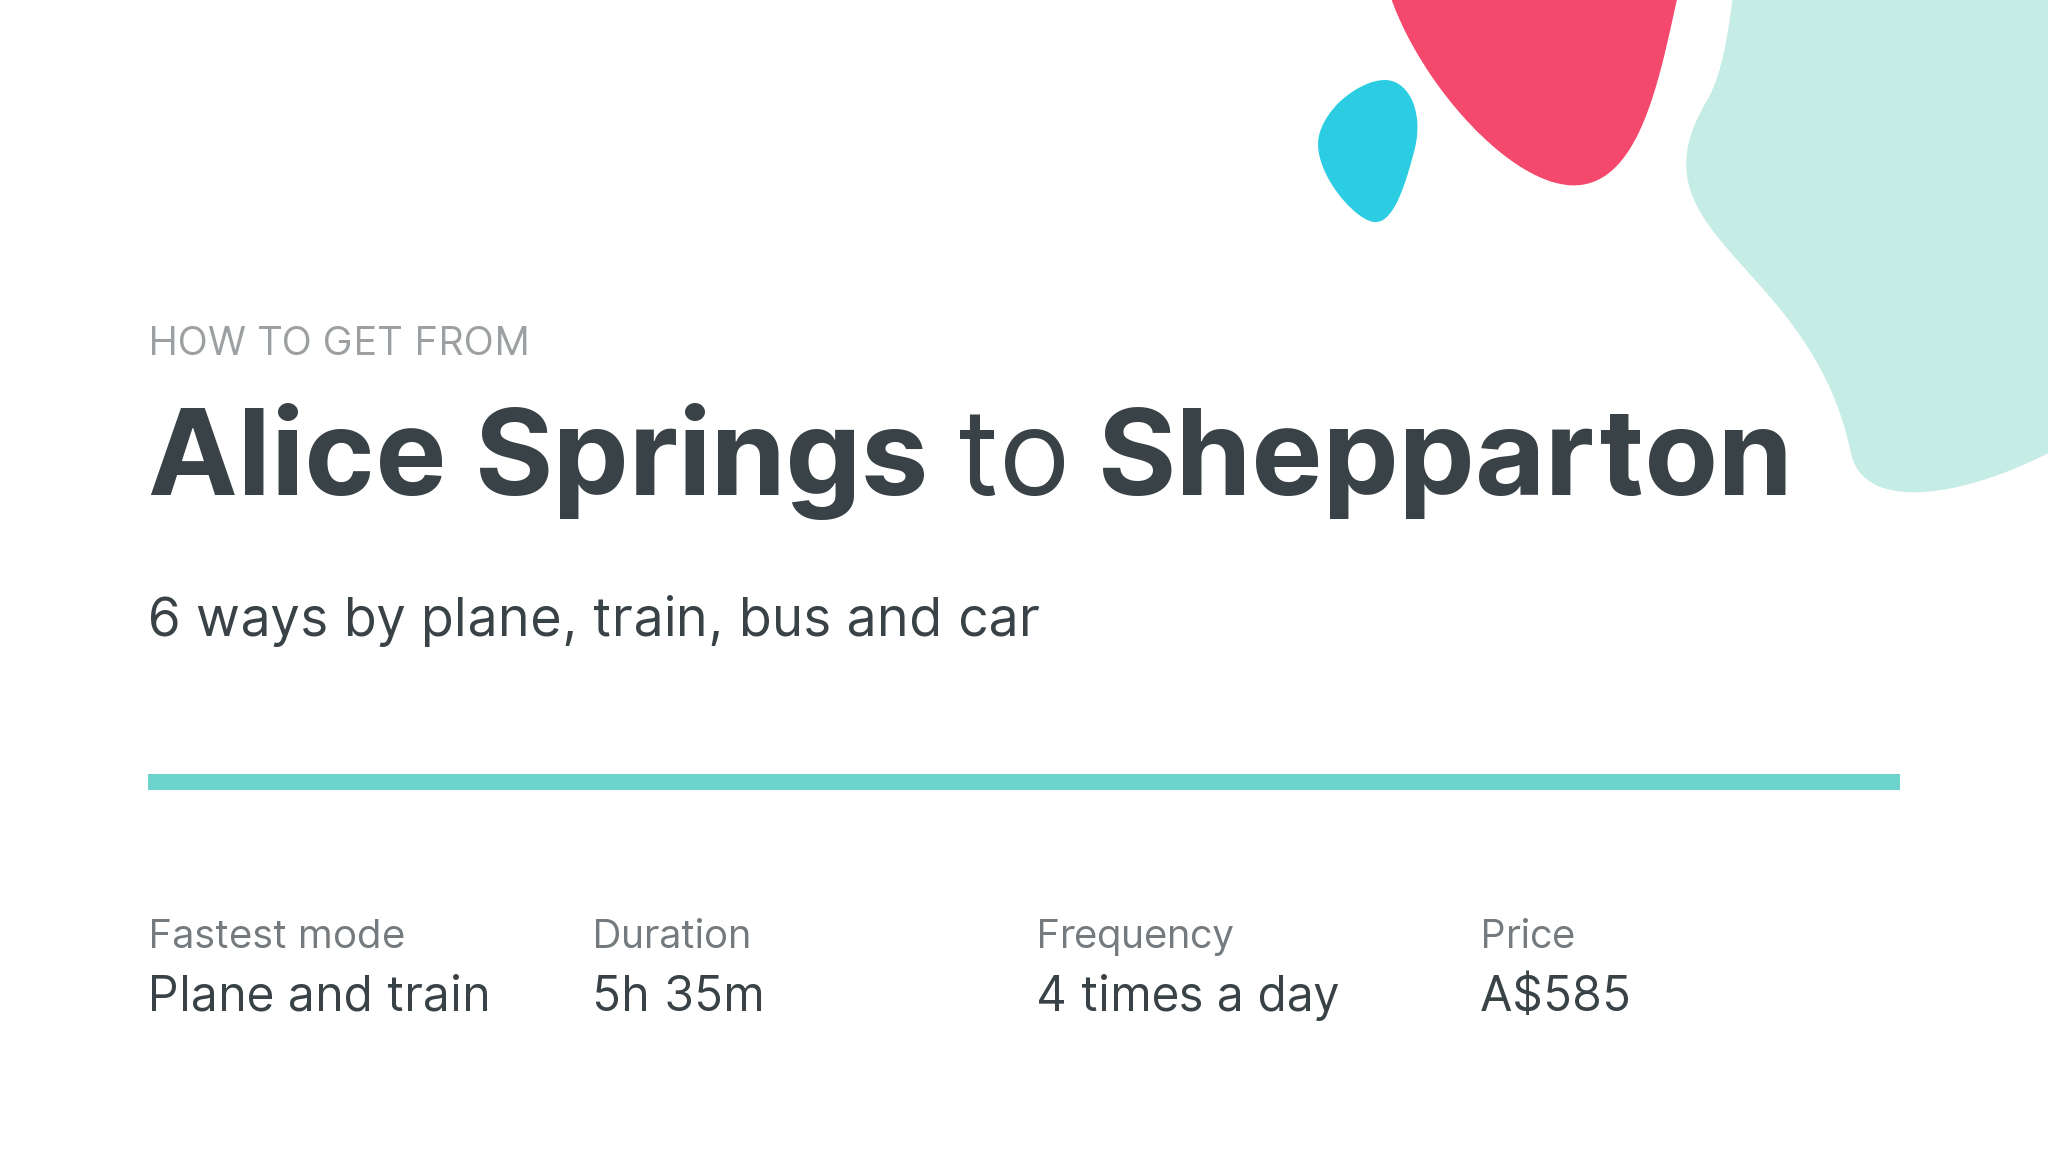 How do I get from Alice Springs to Shepparton